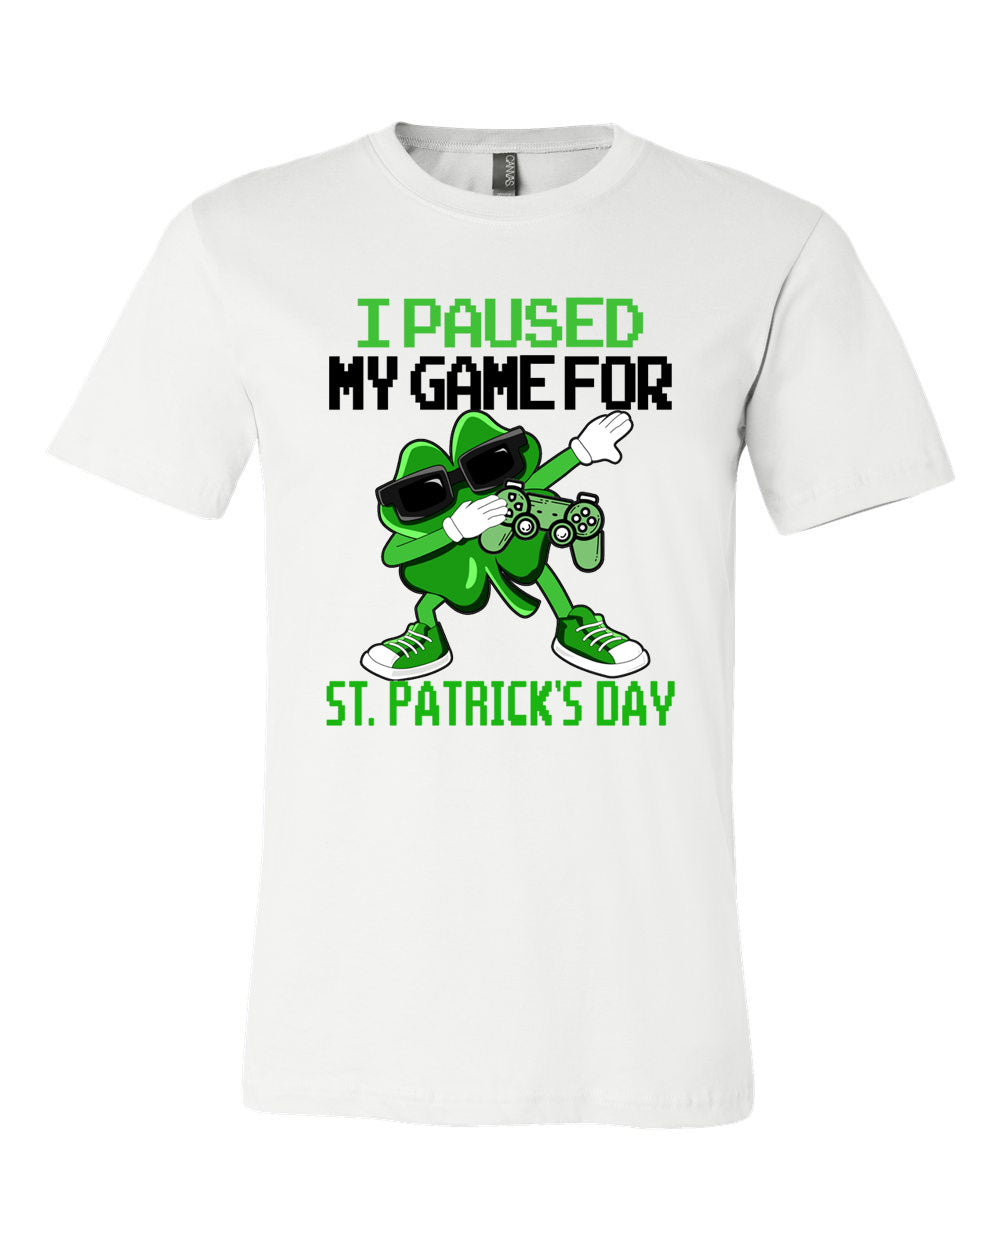 I paused my game St Patrick's Day T-Shirt